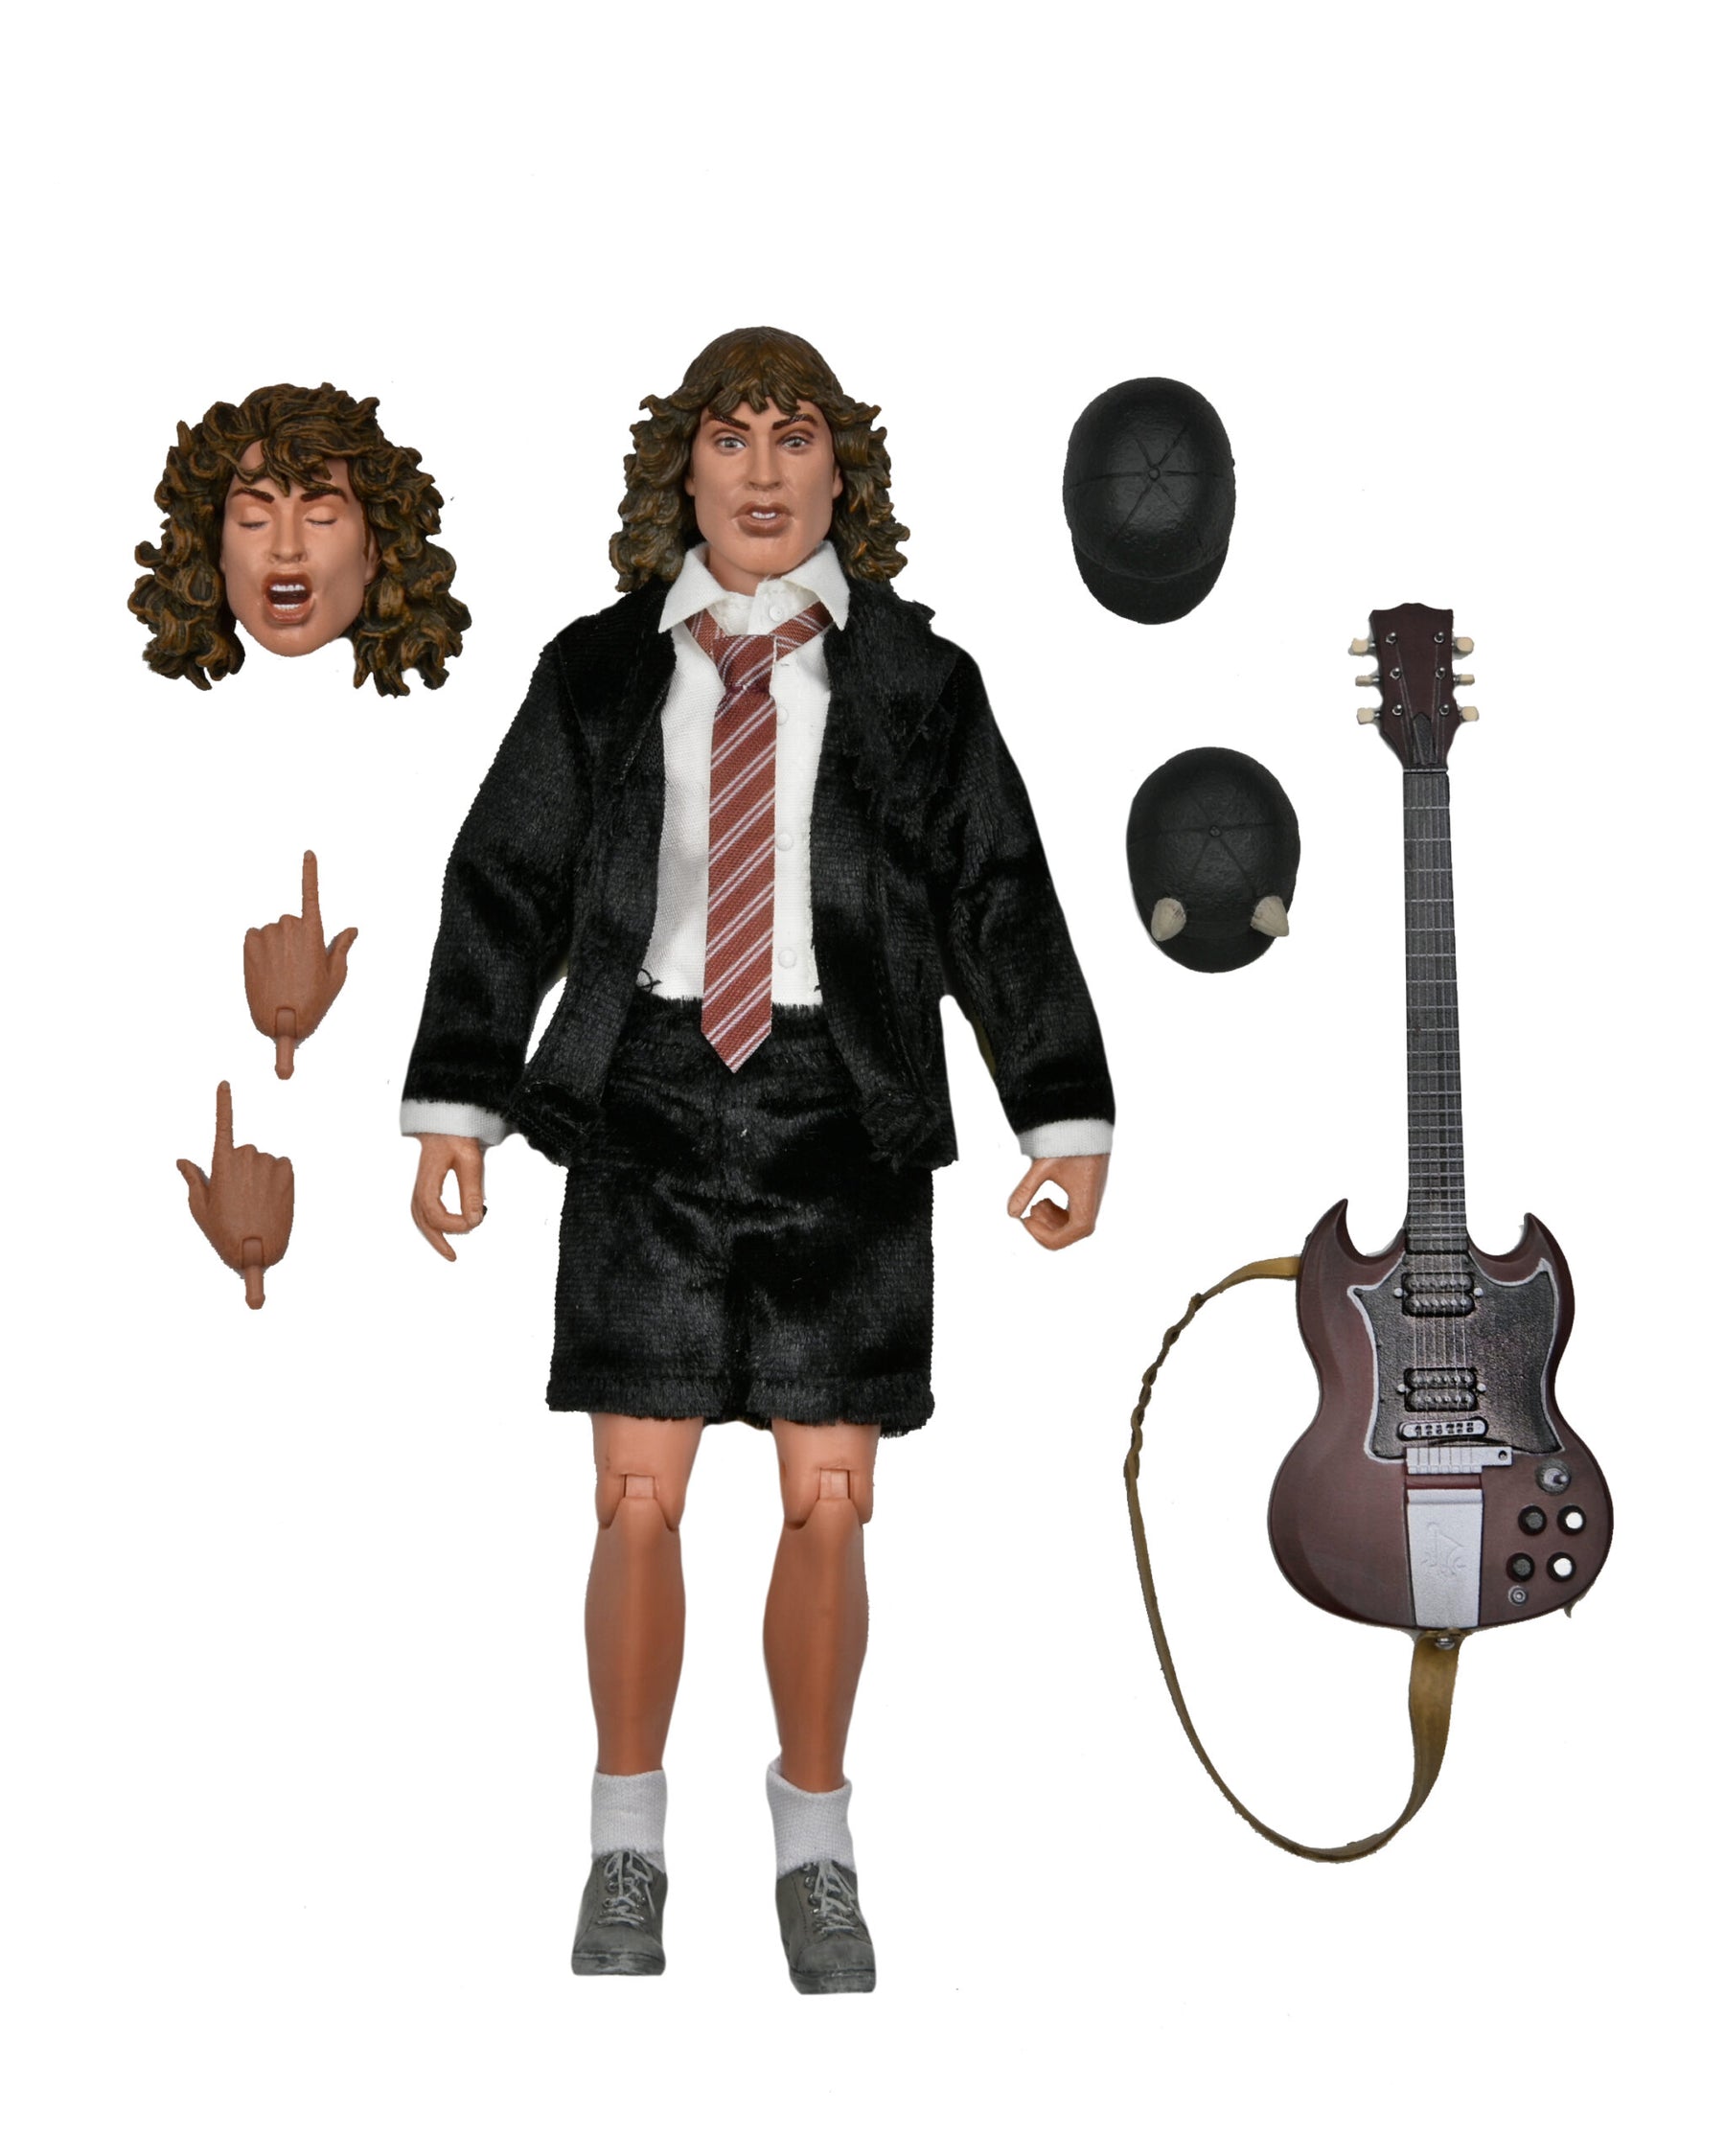 NECA - AC/DC - Angus Young 8" Clothed Action Figure